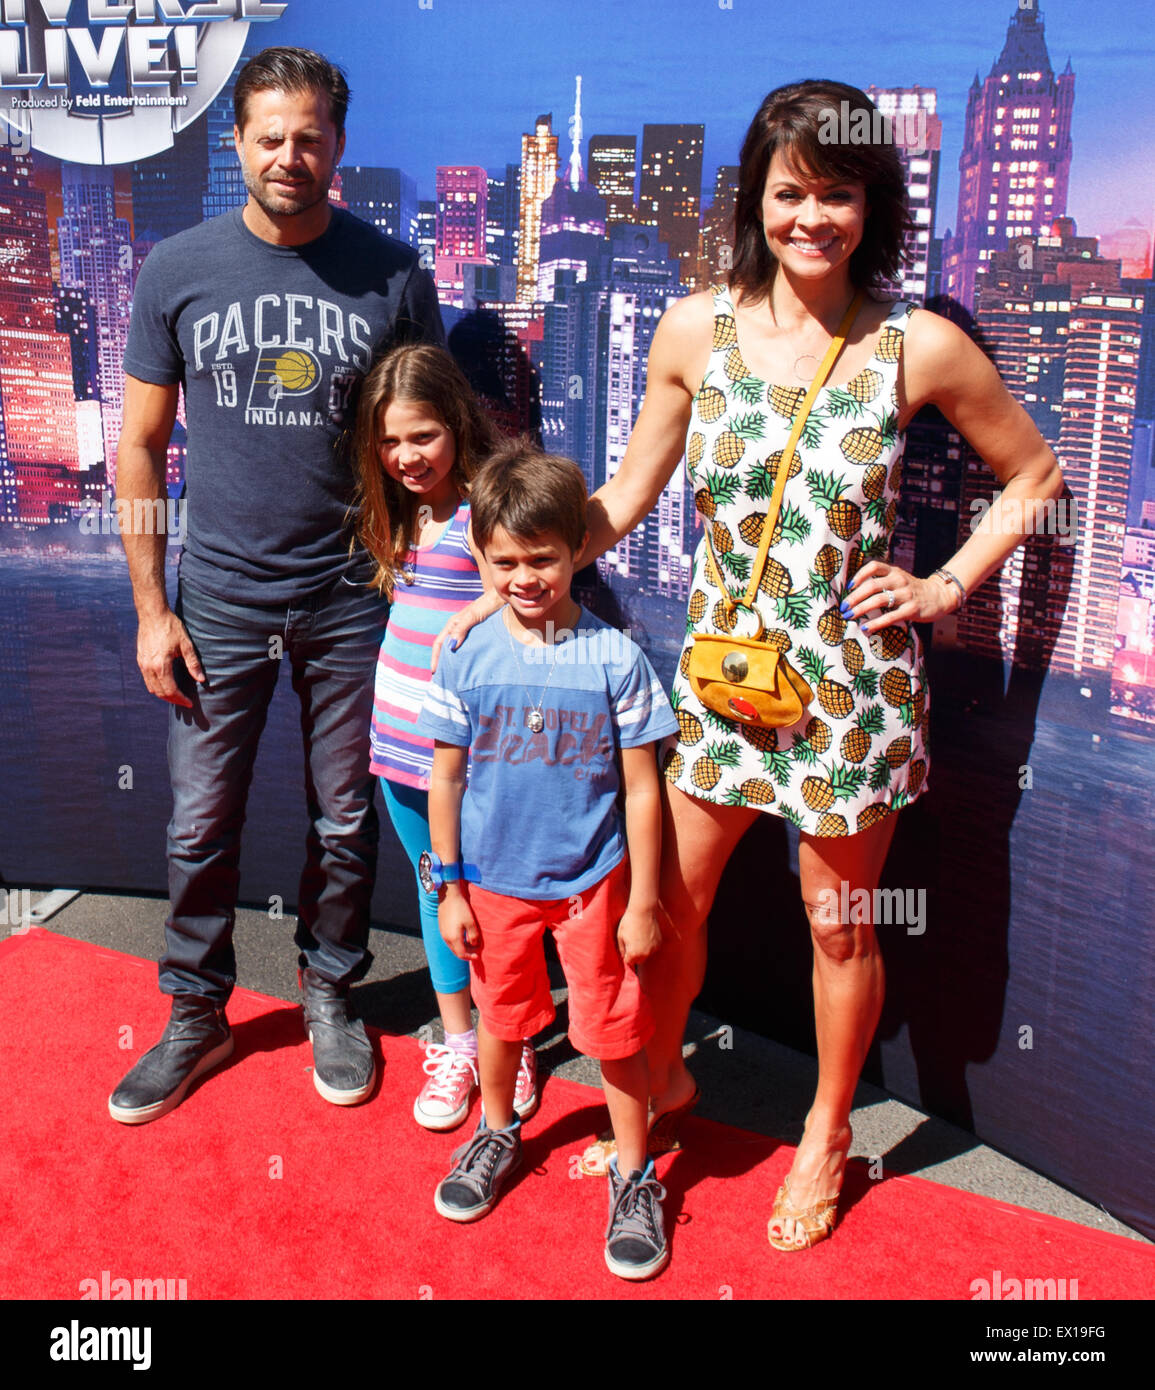 Marvel Universe LIVE! 2015 - Arrivals  Featuring: David Charvet, Brooke Burke, son and daughter Where: Inglewood, California, United States When: 02 May 2015 C Stock Photo